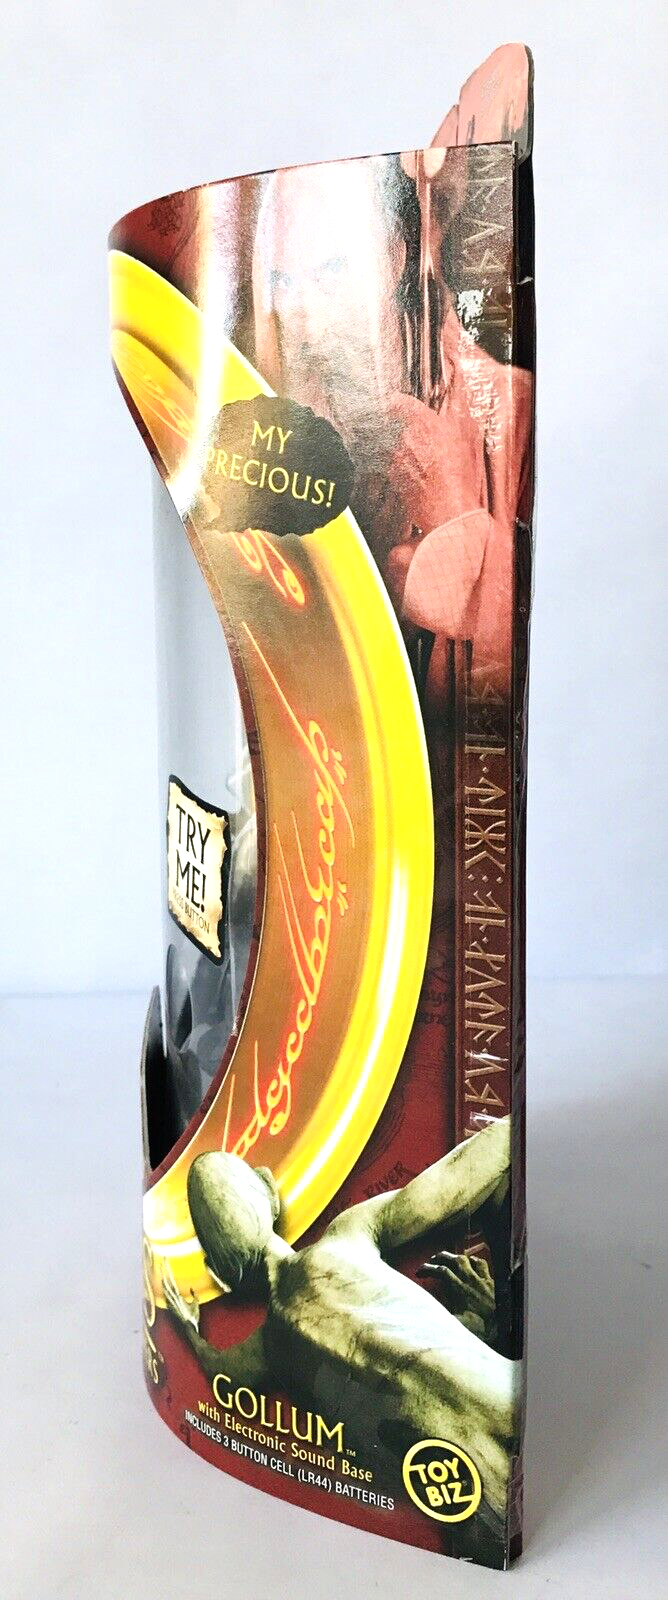 Gollum Lord of the Rings Two Towers Figure & Talking Base My Precious New  in Box